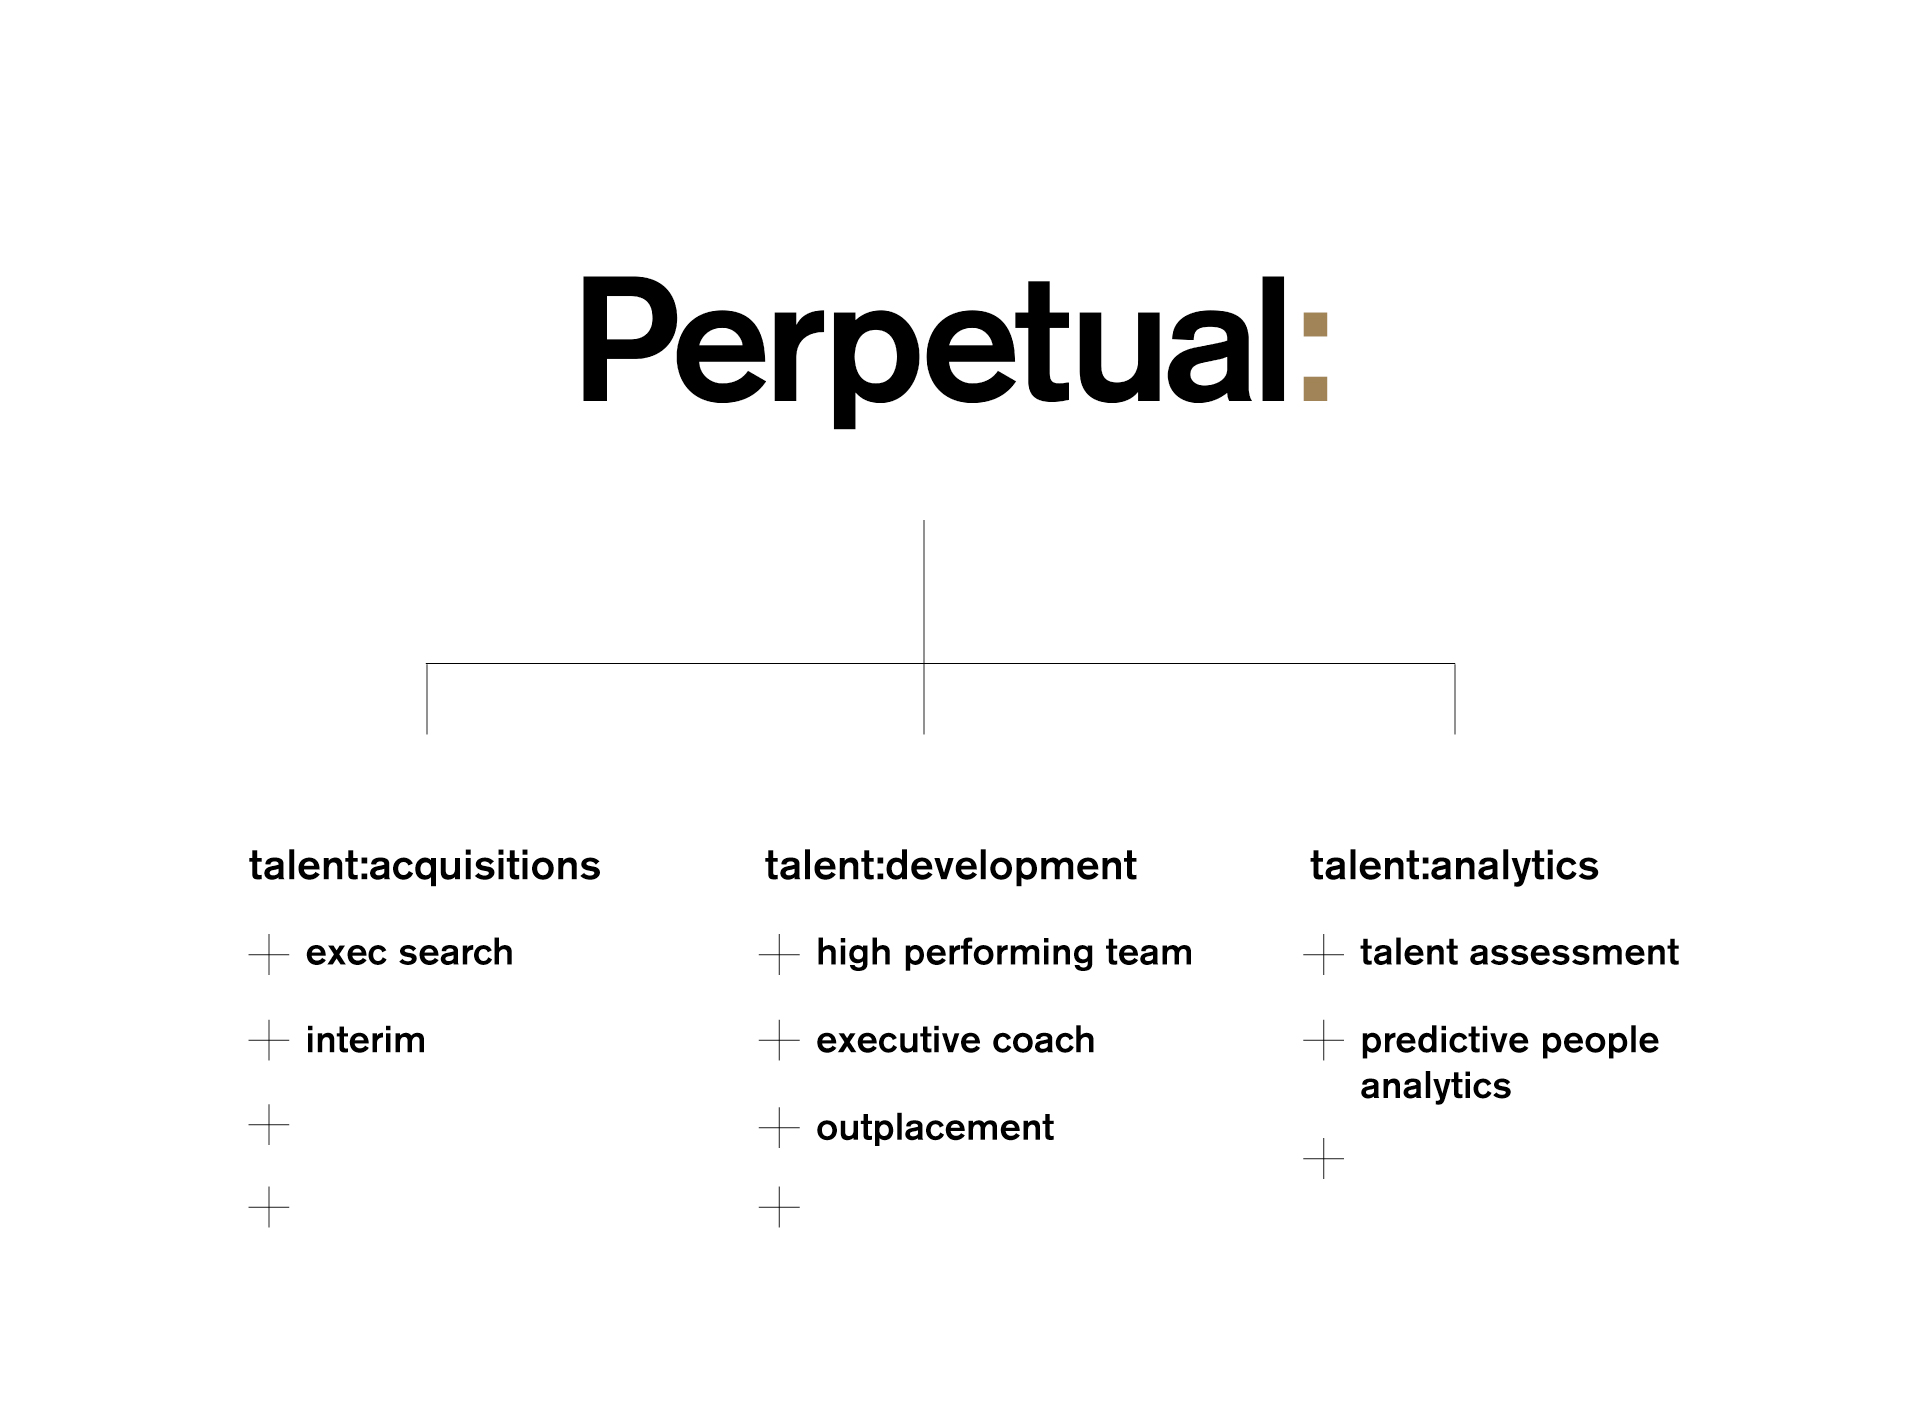 Perpetual-brand-assets-04